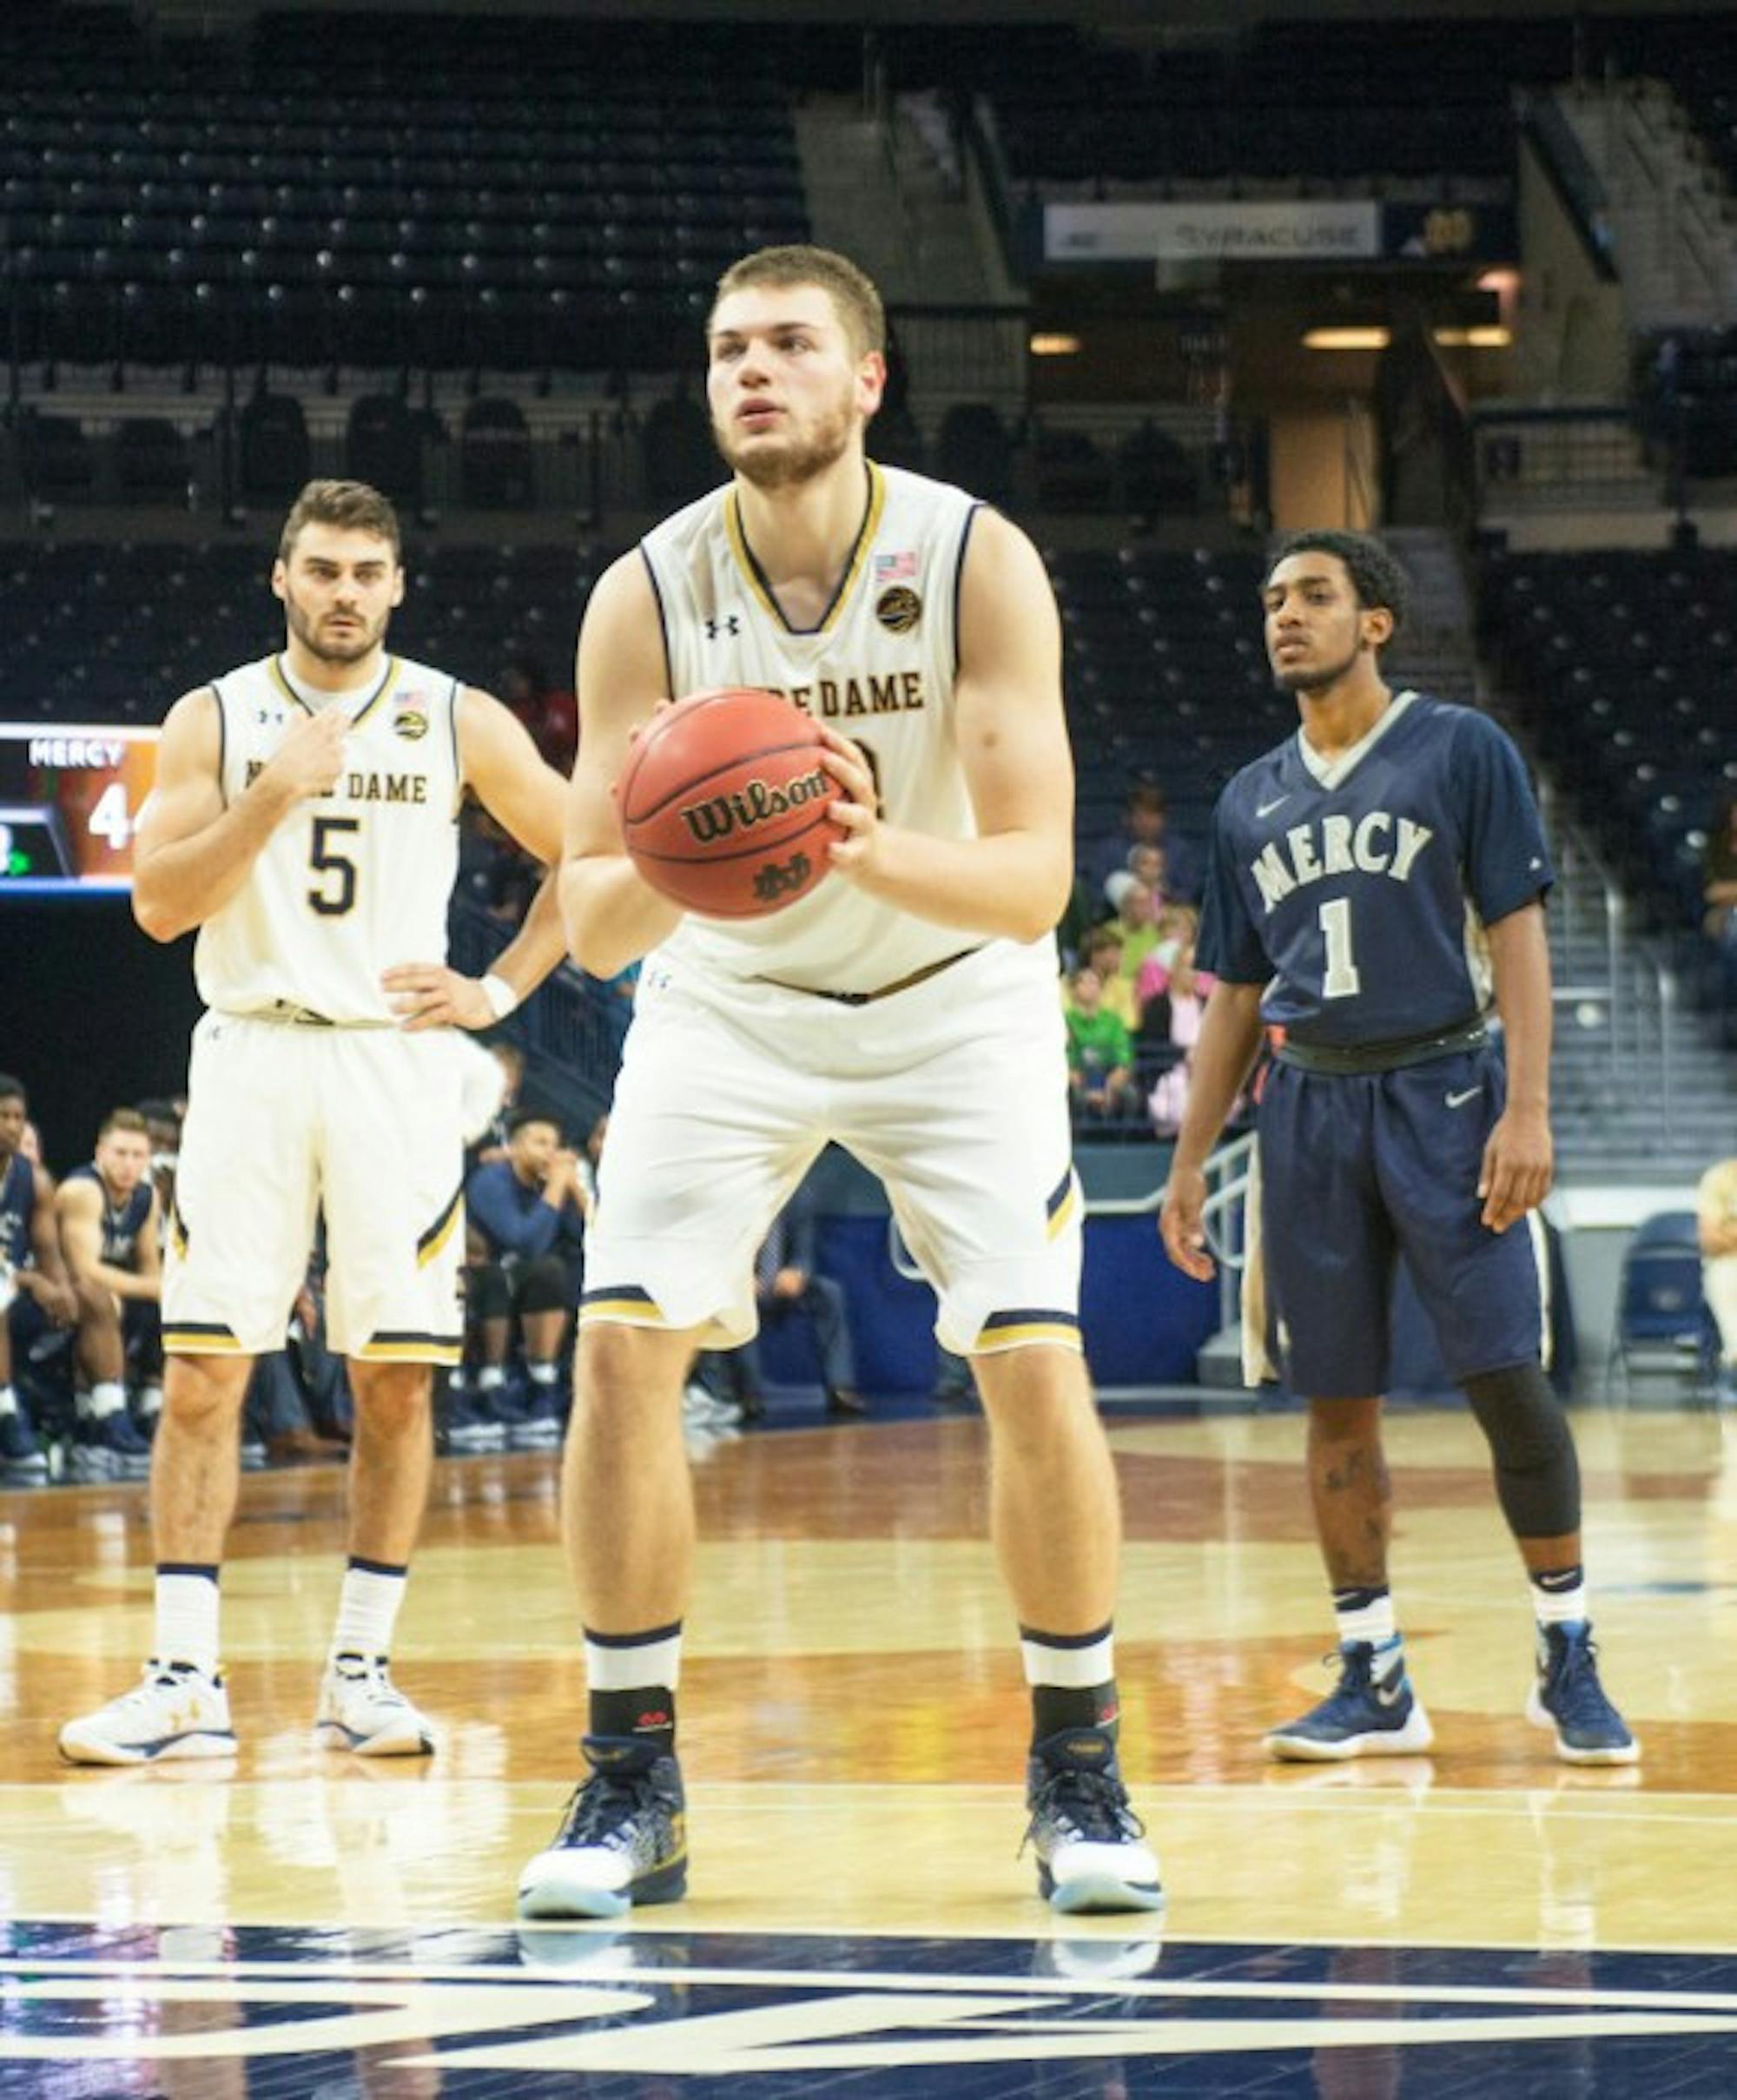 Junior center Martinas Geben prepares for a free throw during Notre Dame’s 119-58 victory over Mercy on Tuesday at Purcell Pavilion. Geben totaled 12 points and nine rebounds in the exhibition matchup.